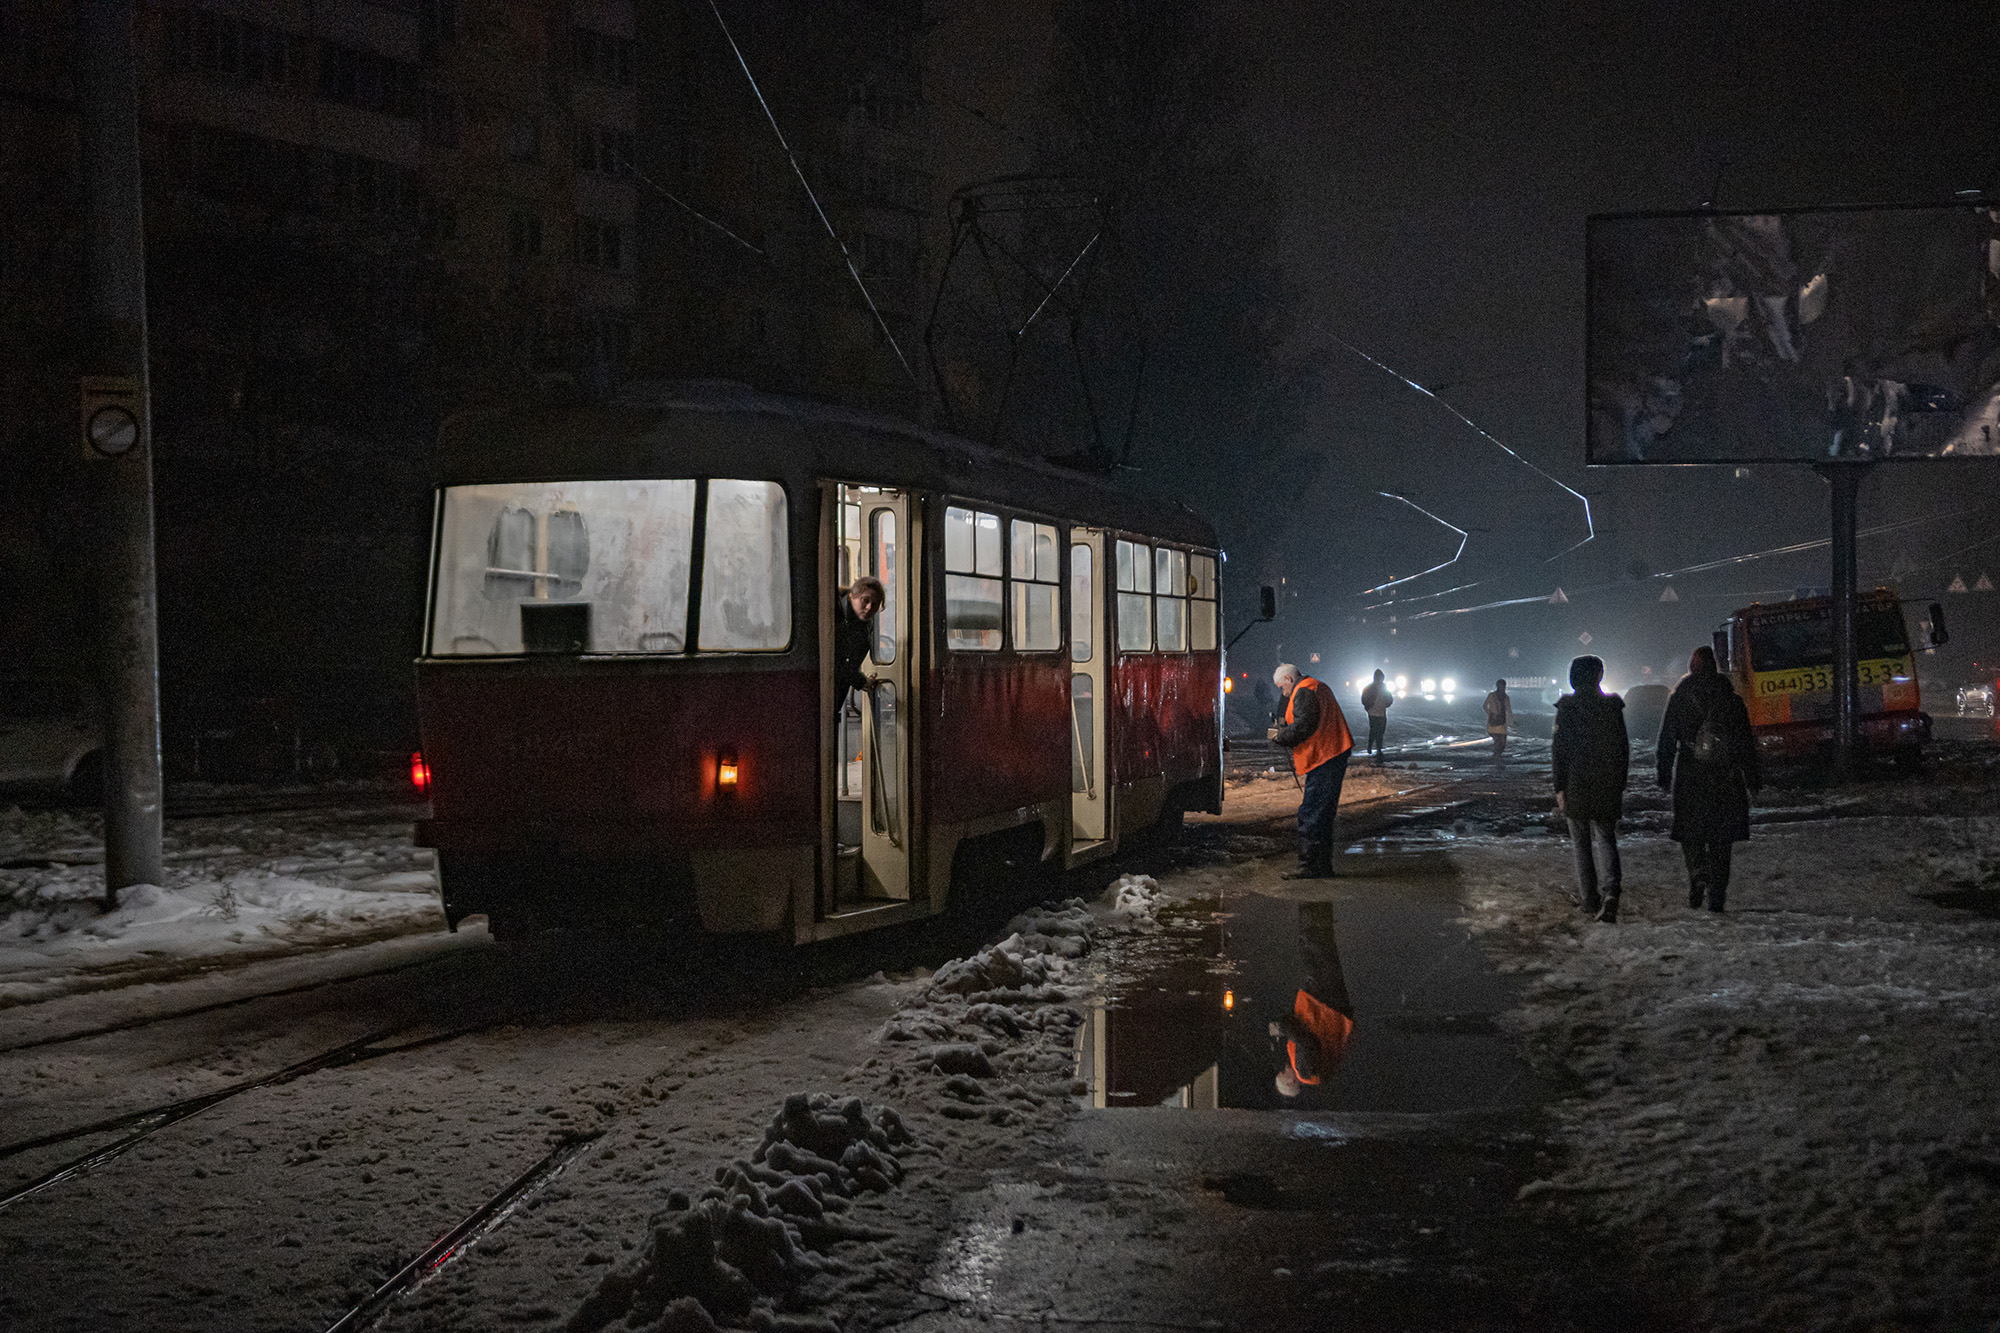 On November 24, a power outage caused a blackout in Kyiv, Ukraine.